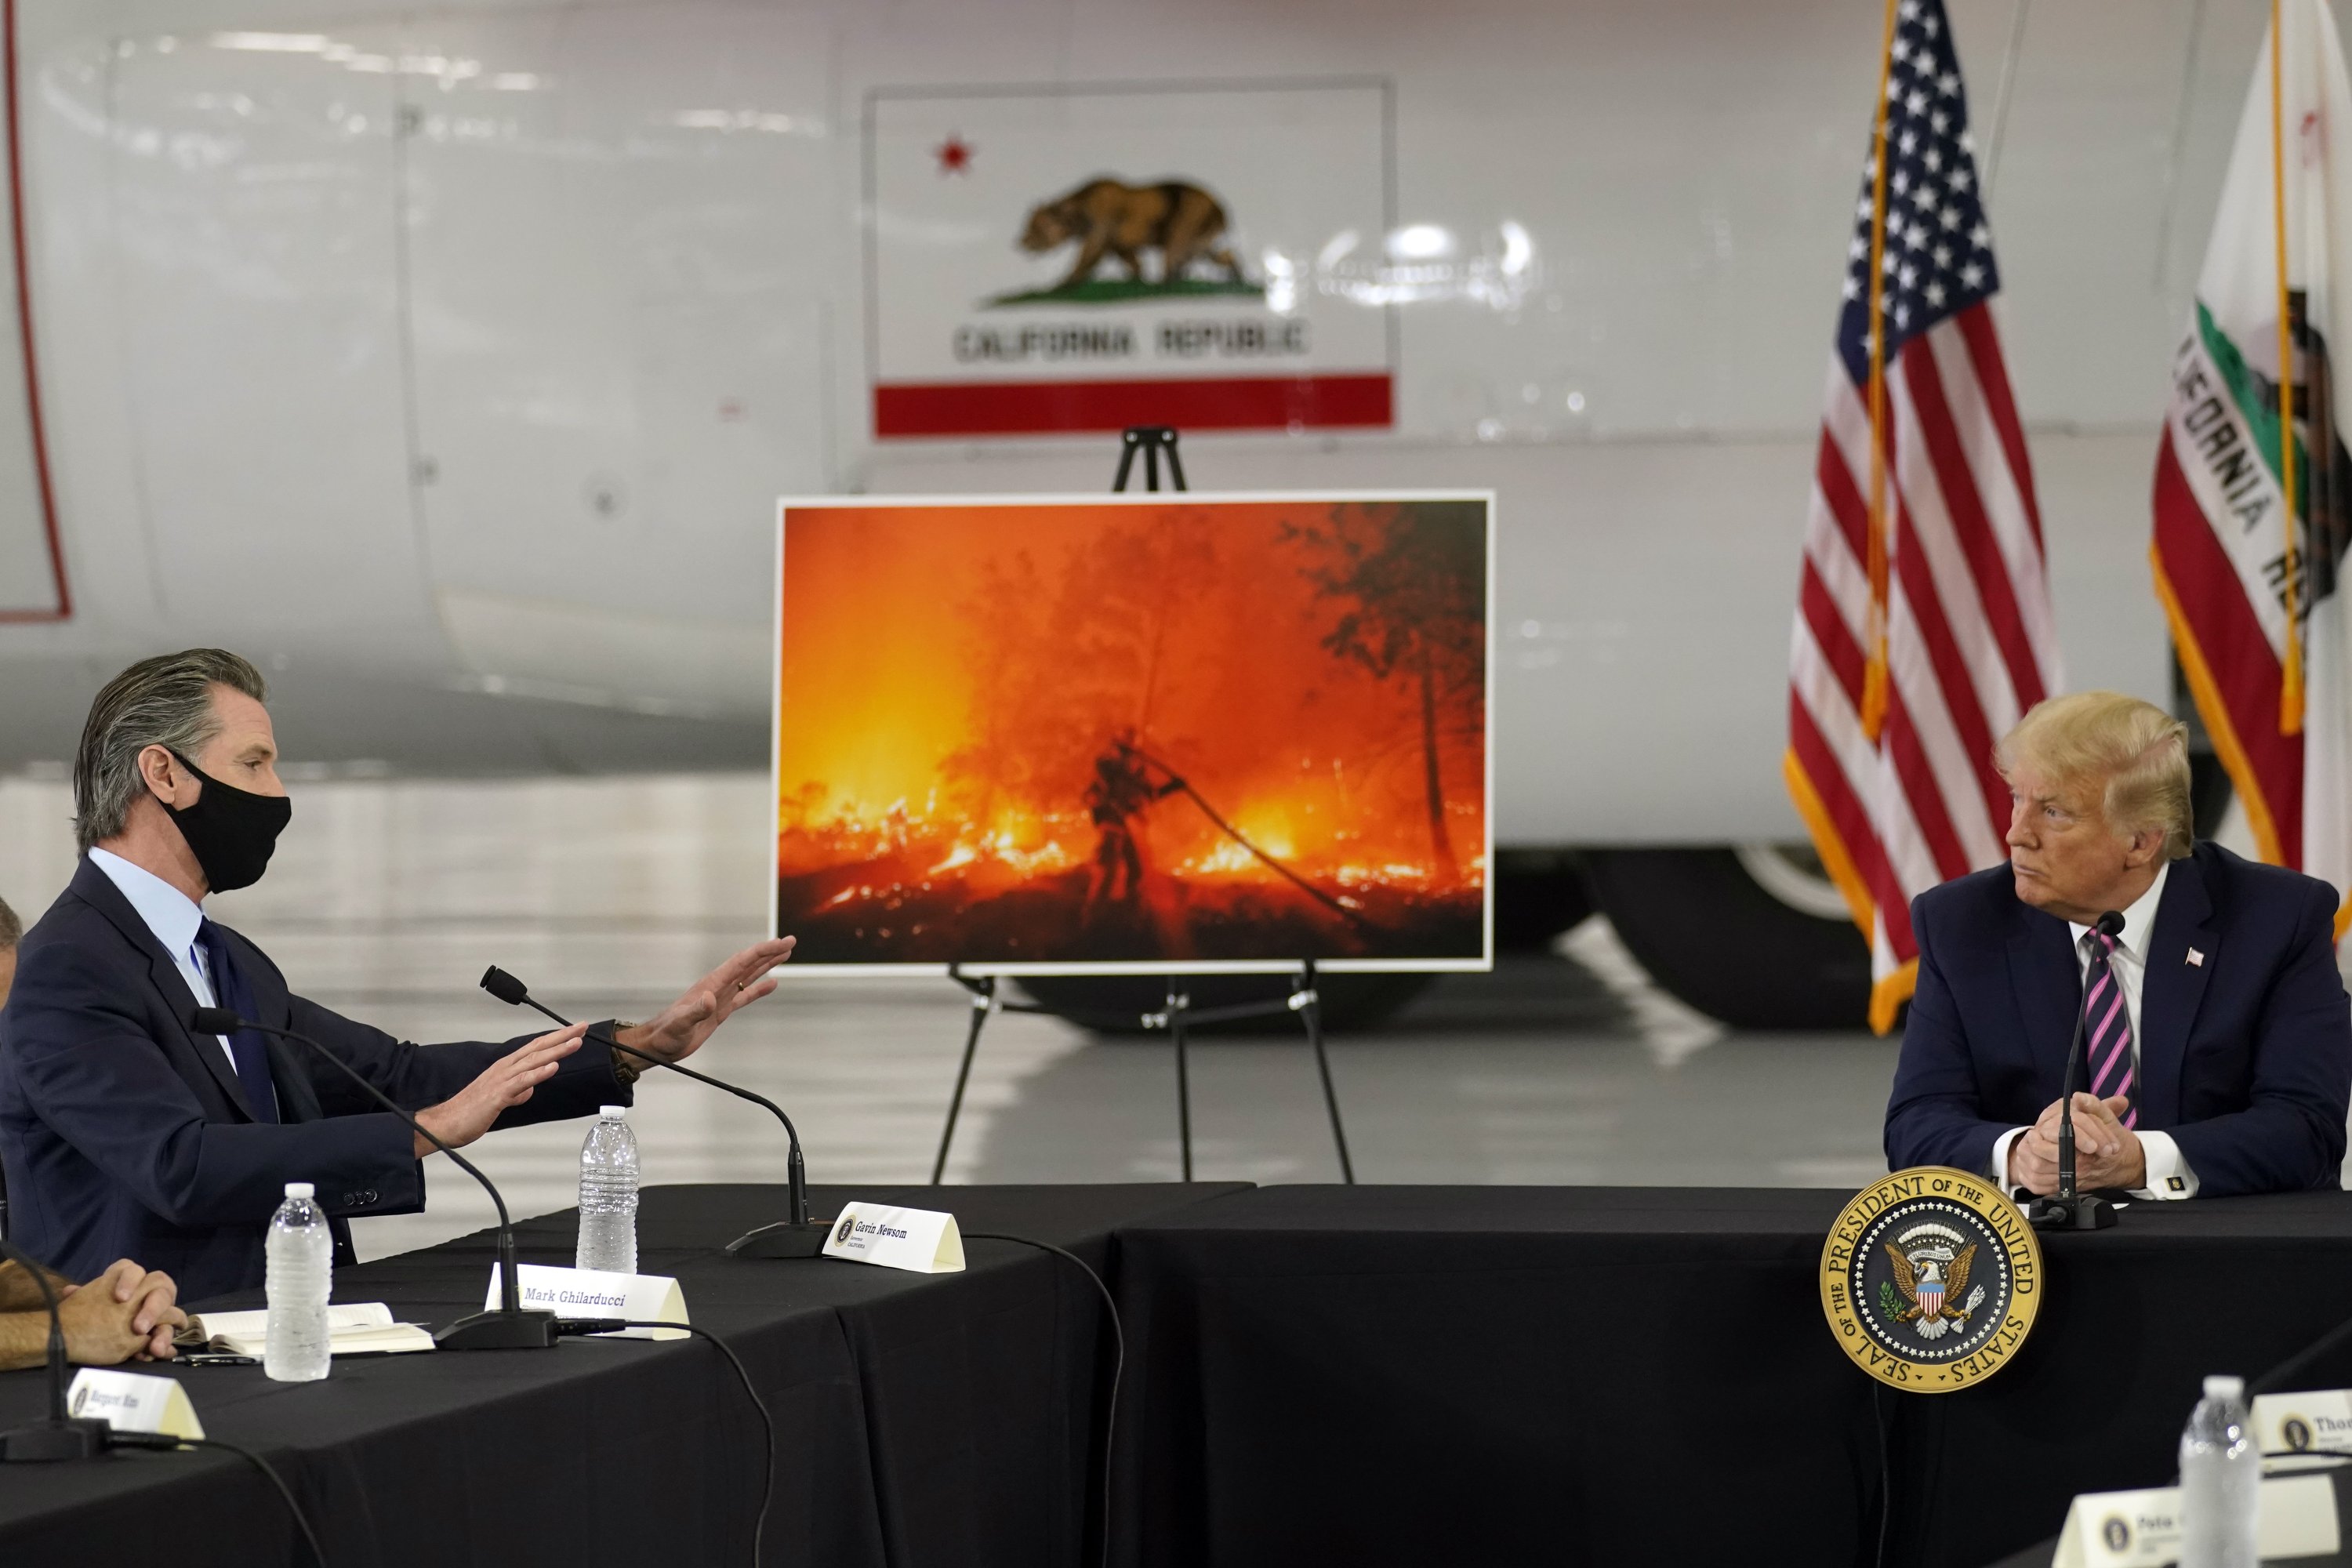 Wildfires raise fight over climate change as Trump visits - The Associated Press